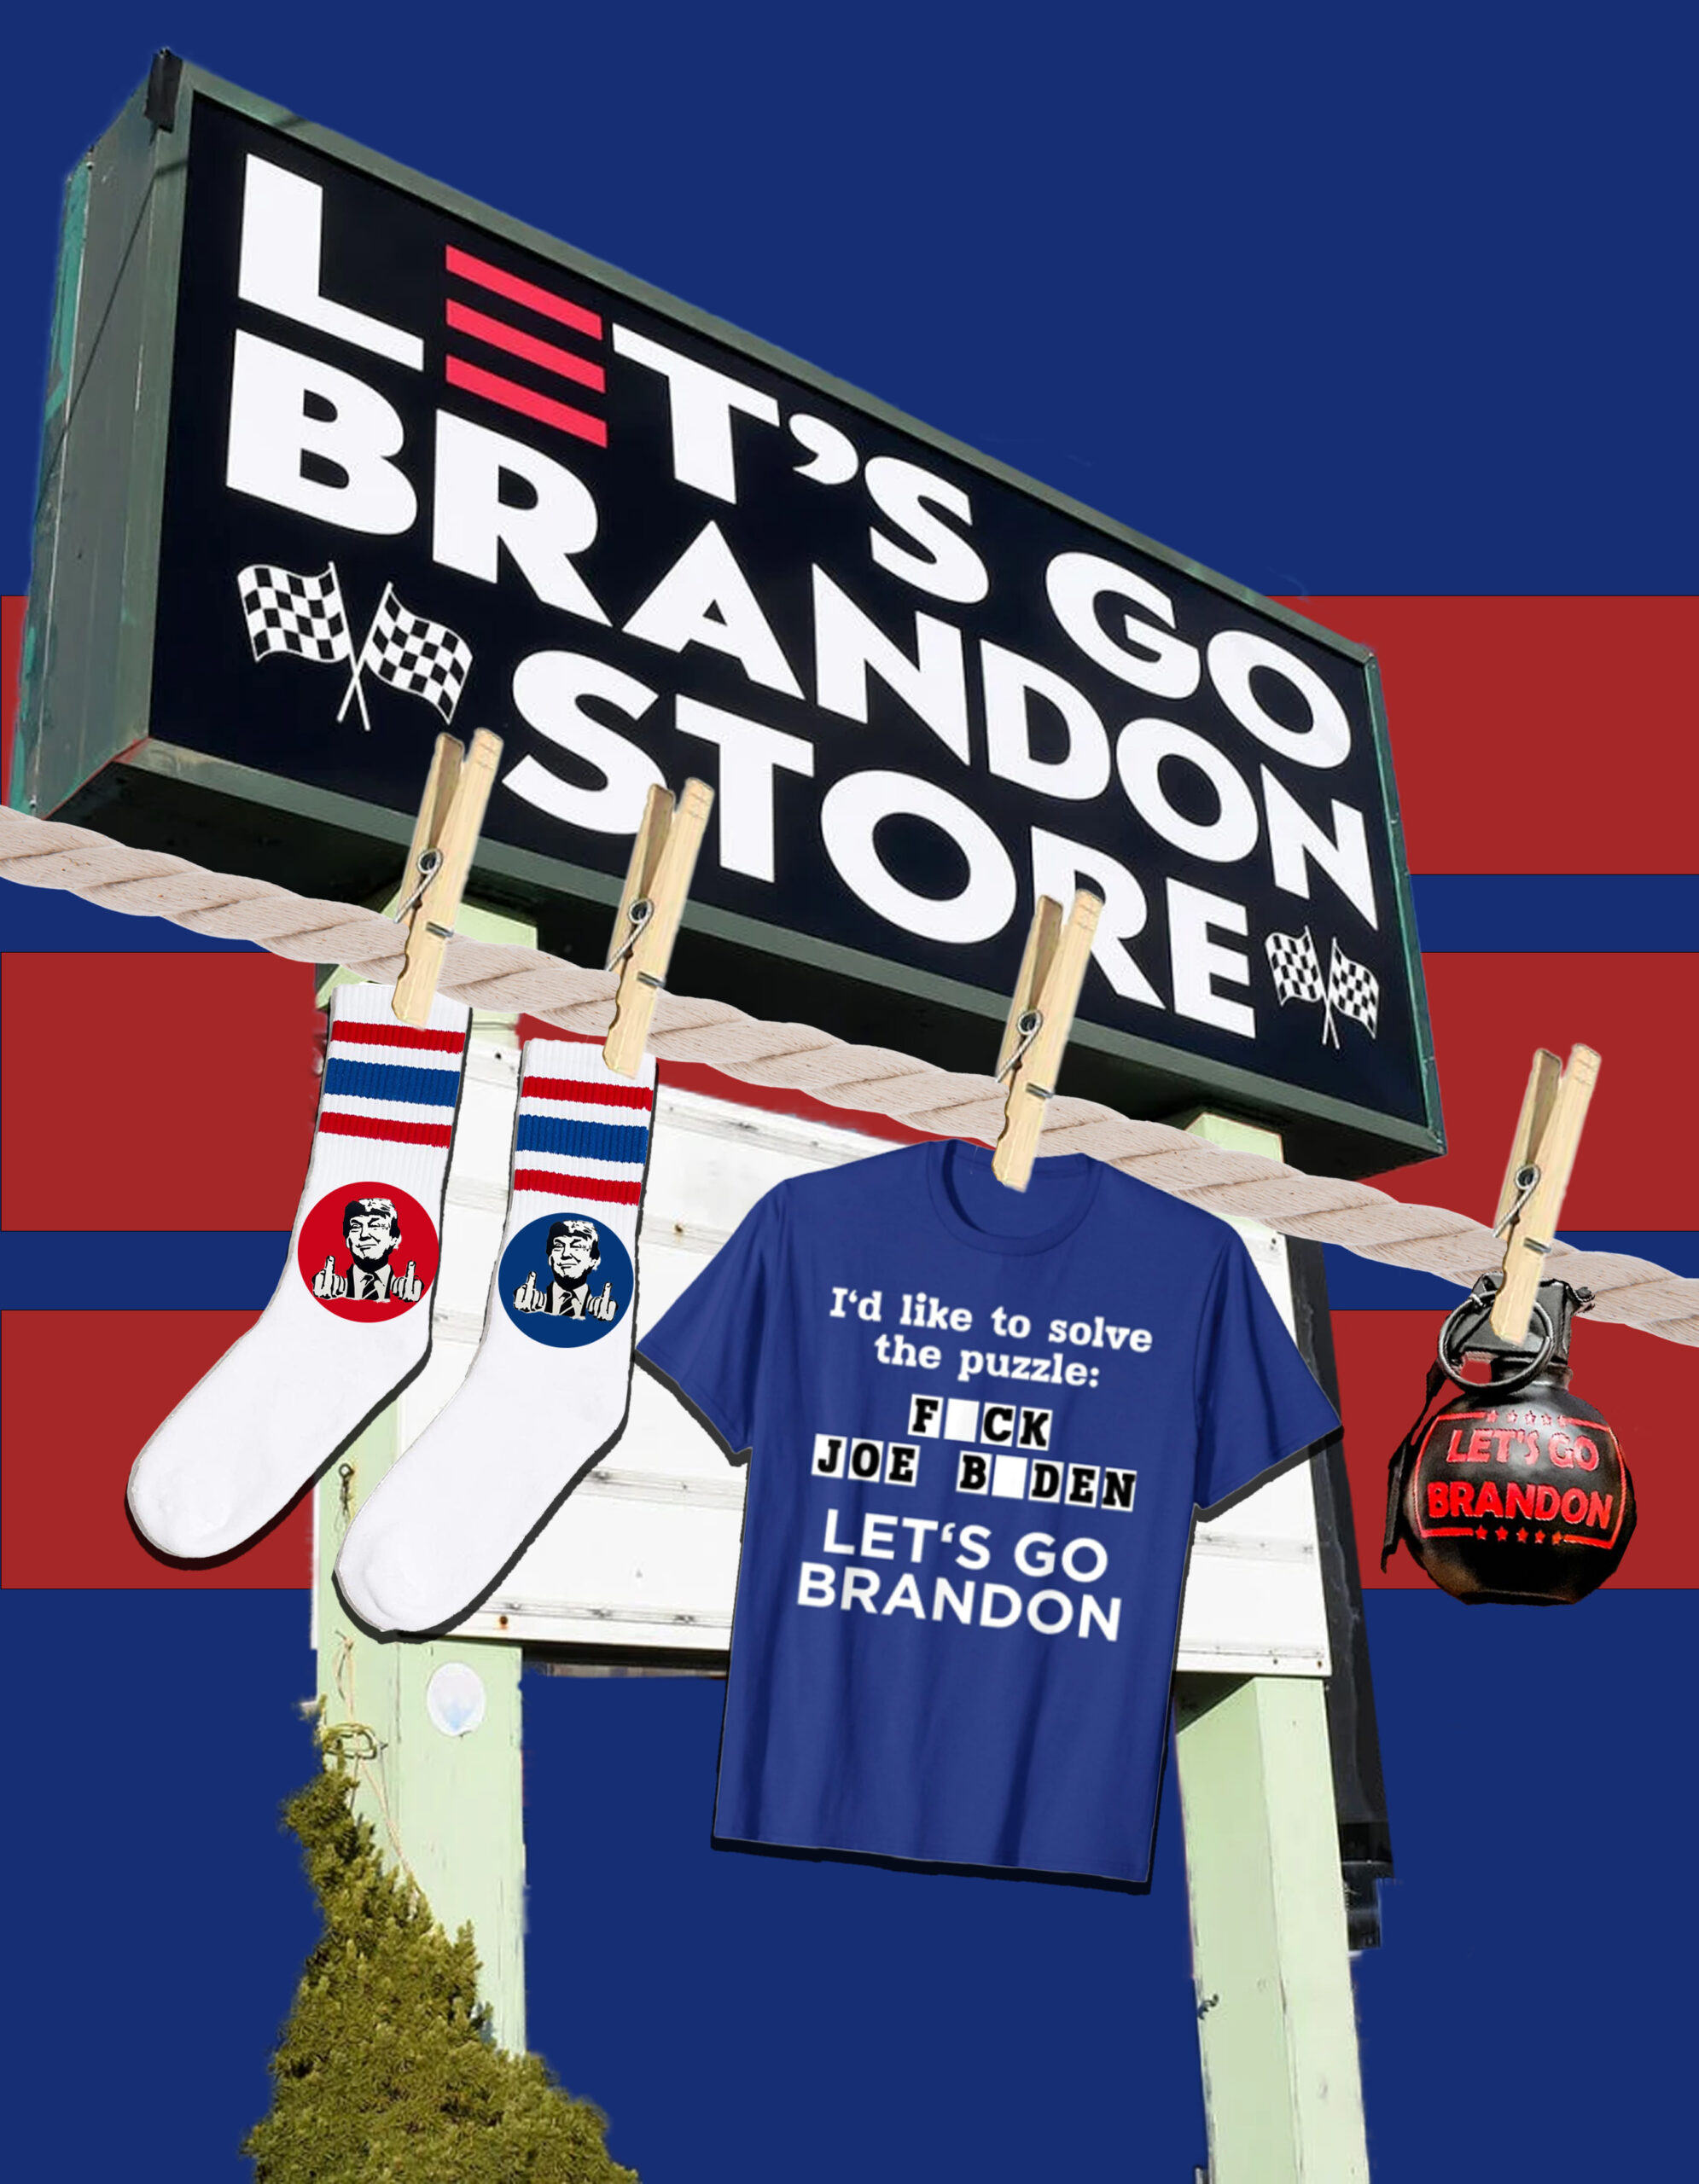 A collection of "Let's Go Brandon" attire assembled in a quasi-collage